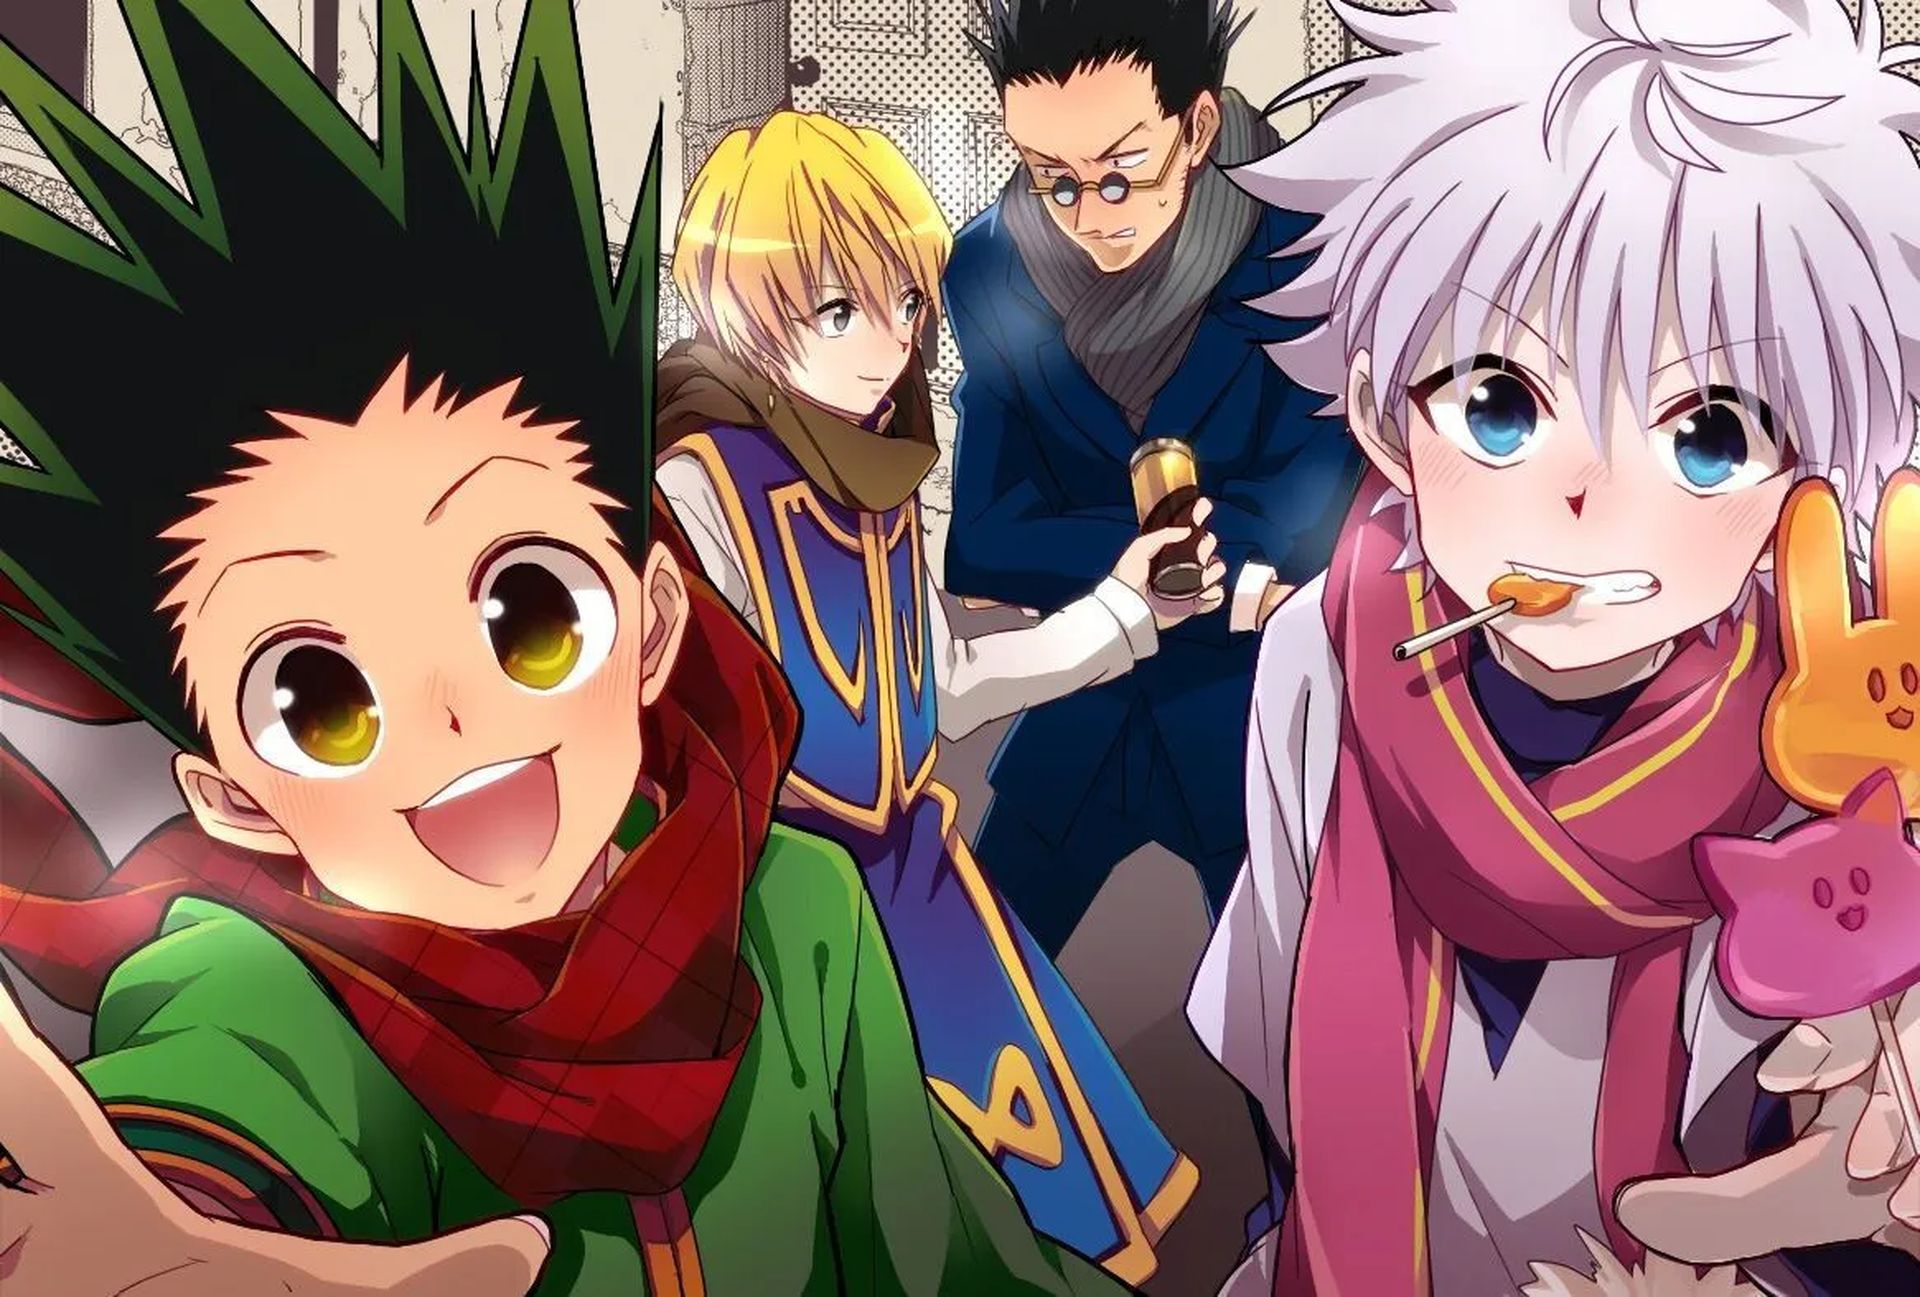 Today we are here to review all HxH Season 7 rumors about trailer, release date, plot and more.